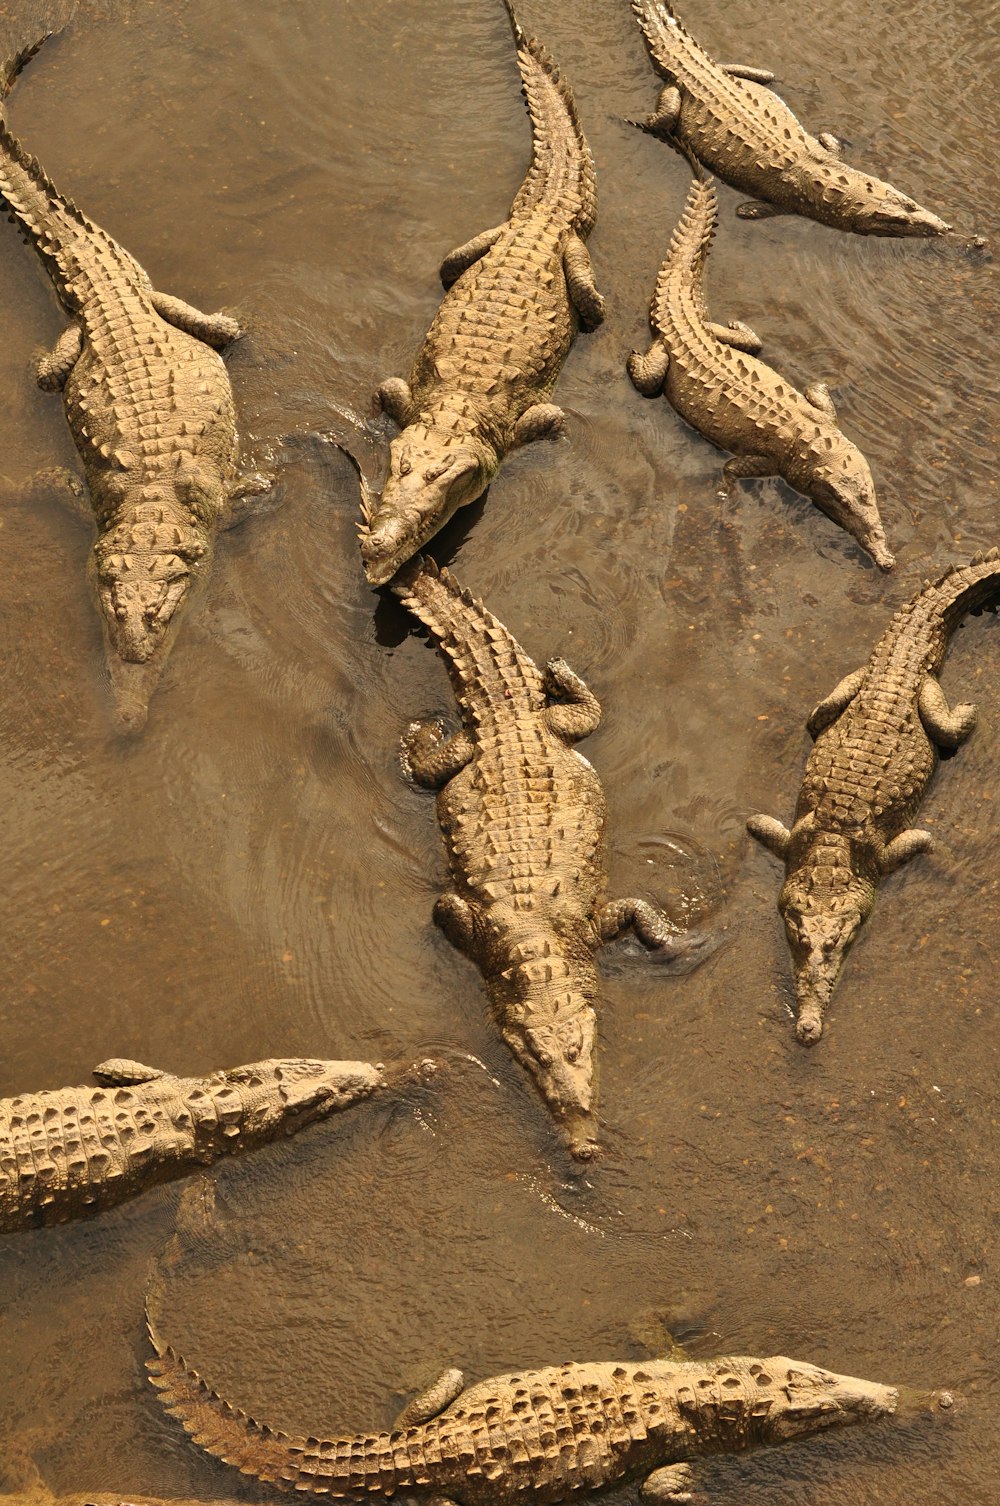 a group of alligators laying in the mud